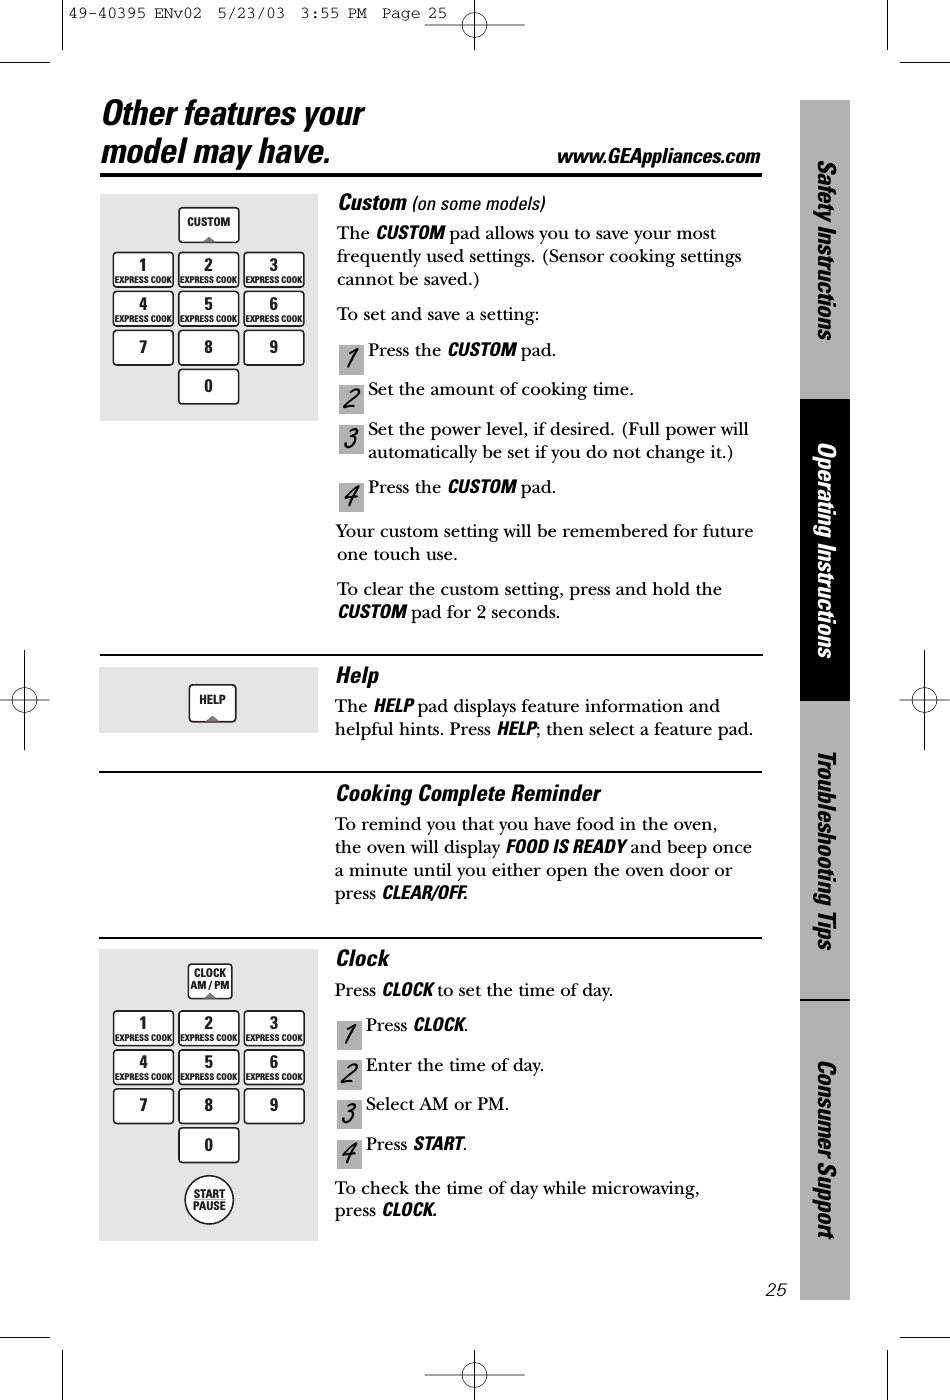 Consumer SupportTroubleshooting TipsOperating InstructionsSafety Instructions25Custom (on some models)The CUSTOM pad allows you to save your mostfrequently used settings. (Sensor cooking settings cannot be saved.)To set and save a setting:Press the CUSTOM pad.Set the amount of cooking time.Set the power level, if desired. (Full power willautomatically be set if you do not change it.)Press the CUSTOM pad.Your custom setting will be remembered for futureone touch use.To clear the custom setting, press and hold theCUSTOM pad for 2 seconds.4321CUSTOM1EXPRESS COOK2EXPRESS COOK3EXPRESS COOK4EXPRESS COOK5EXPRESS COOK6EXPRESS COOK7 8 90Other features your model may have. www.GEAppliances.com1EXPRESS COOK3EXPRESS COOK4EXPRESS COOK6EXPRESS COOK2EXPRESS COOK5EXPRESS COOK7890STARTPAUSECLOCKAM / PMHelpThe HELP pad displays feature information andhelpful hints. Press HELP; then select a feature pad.HELPCooking Complete ReminderTo remind you that you have food in the oven, the oven will display FOOD IS READY and beep oncea minute until you either open the oven door or press CLEAR/OFF.ClockPress CLOCK to set the time of day. Press CLOCK.Enter the time of day.Select AM or PM.Press START.To check the time of day while microwaving, press CLOCK.432149-40395 ENv02  5/23/03  3:55 PM  Page 25